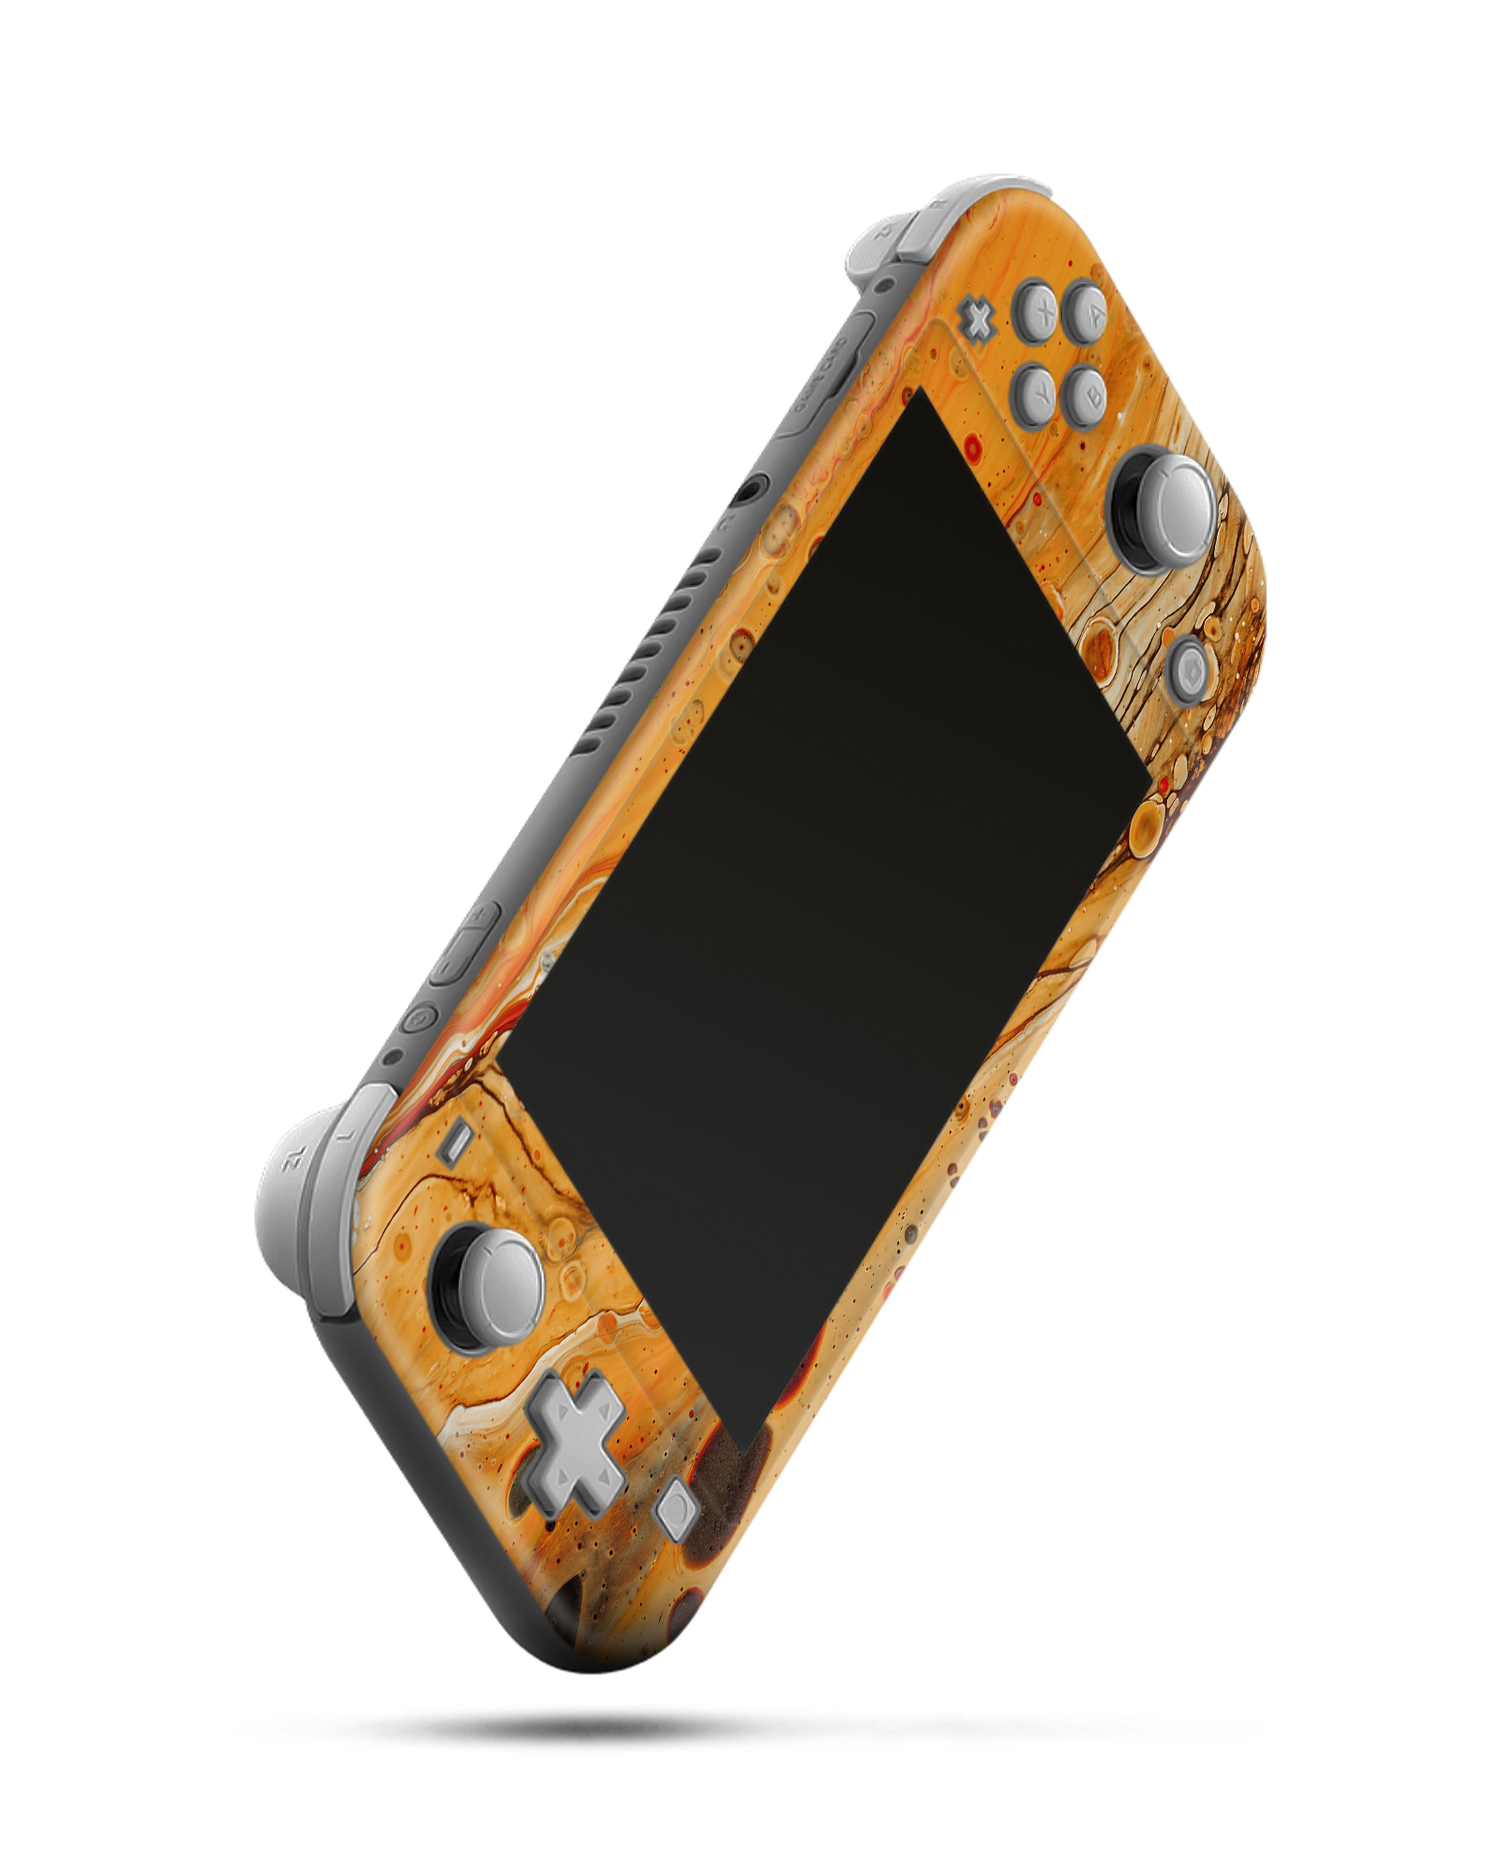 Jupiter Console Skin for Nintendo Switch Lite: Side view